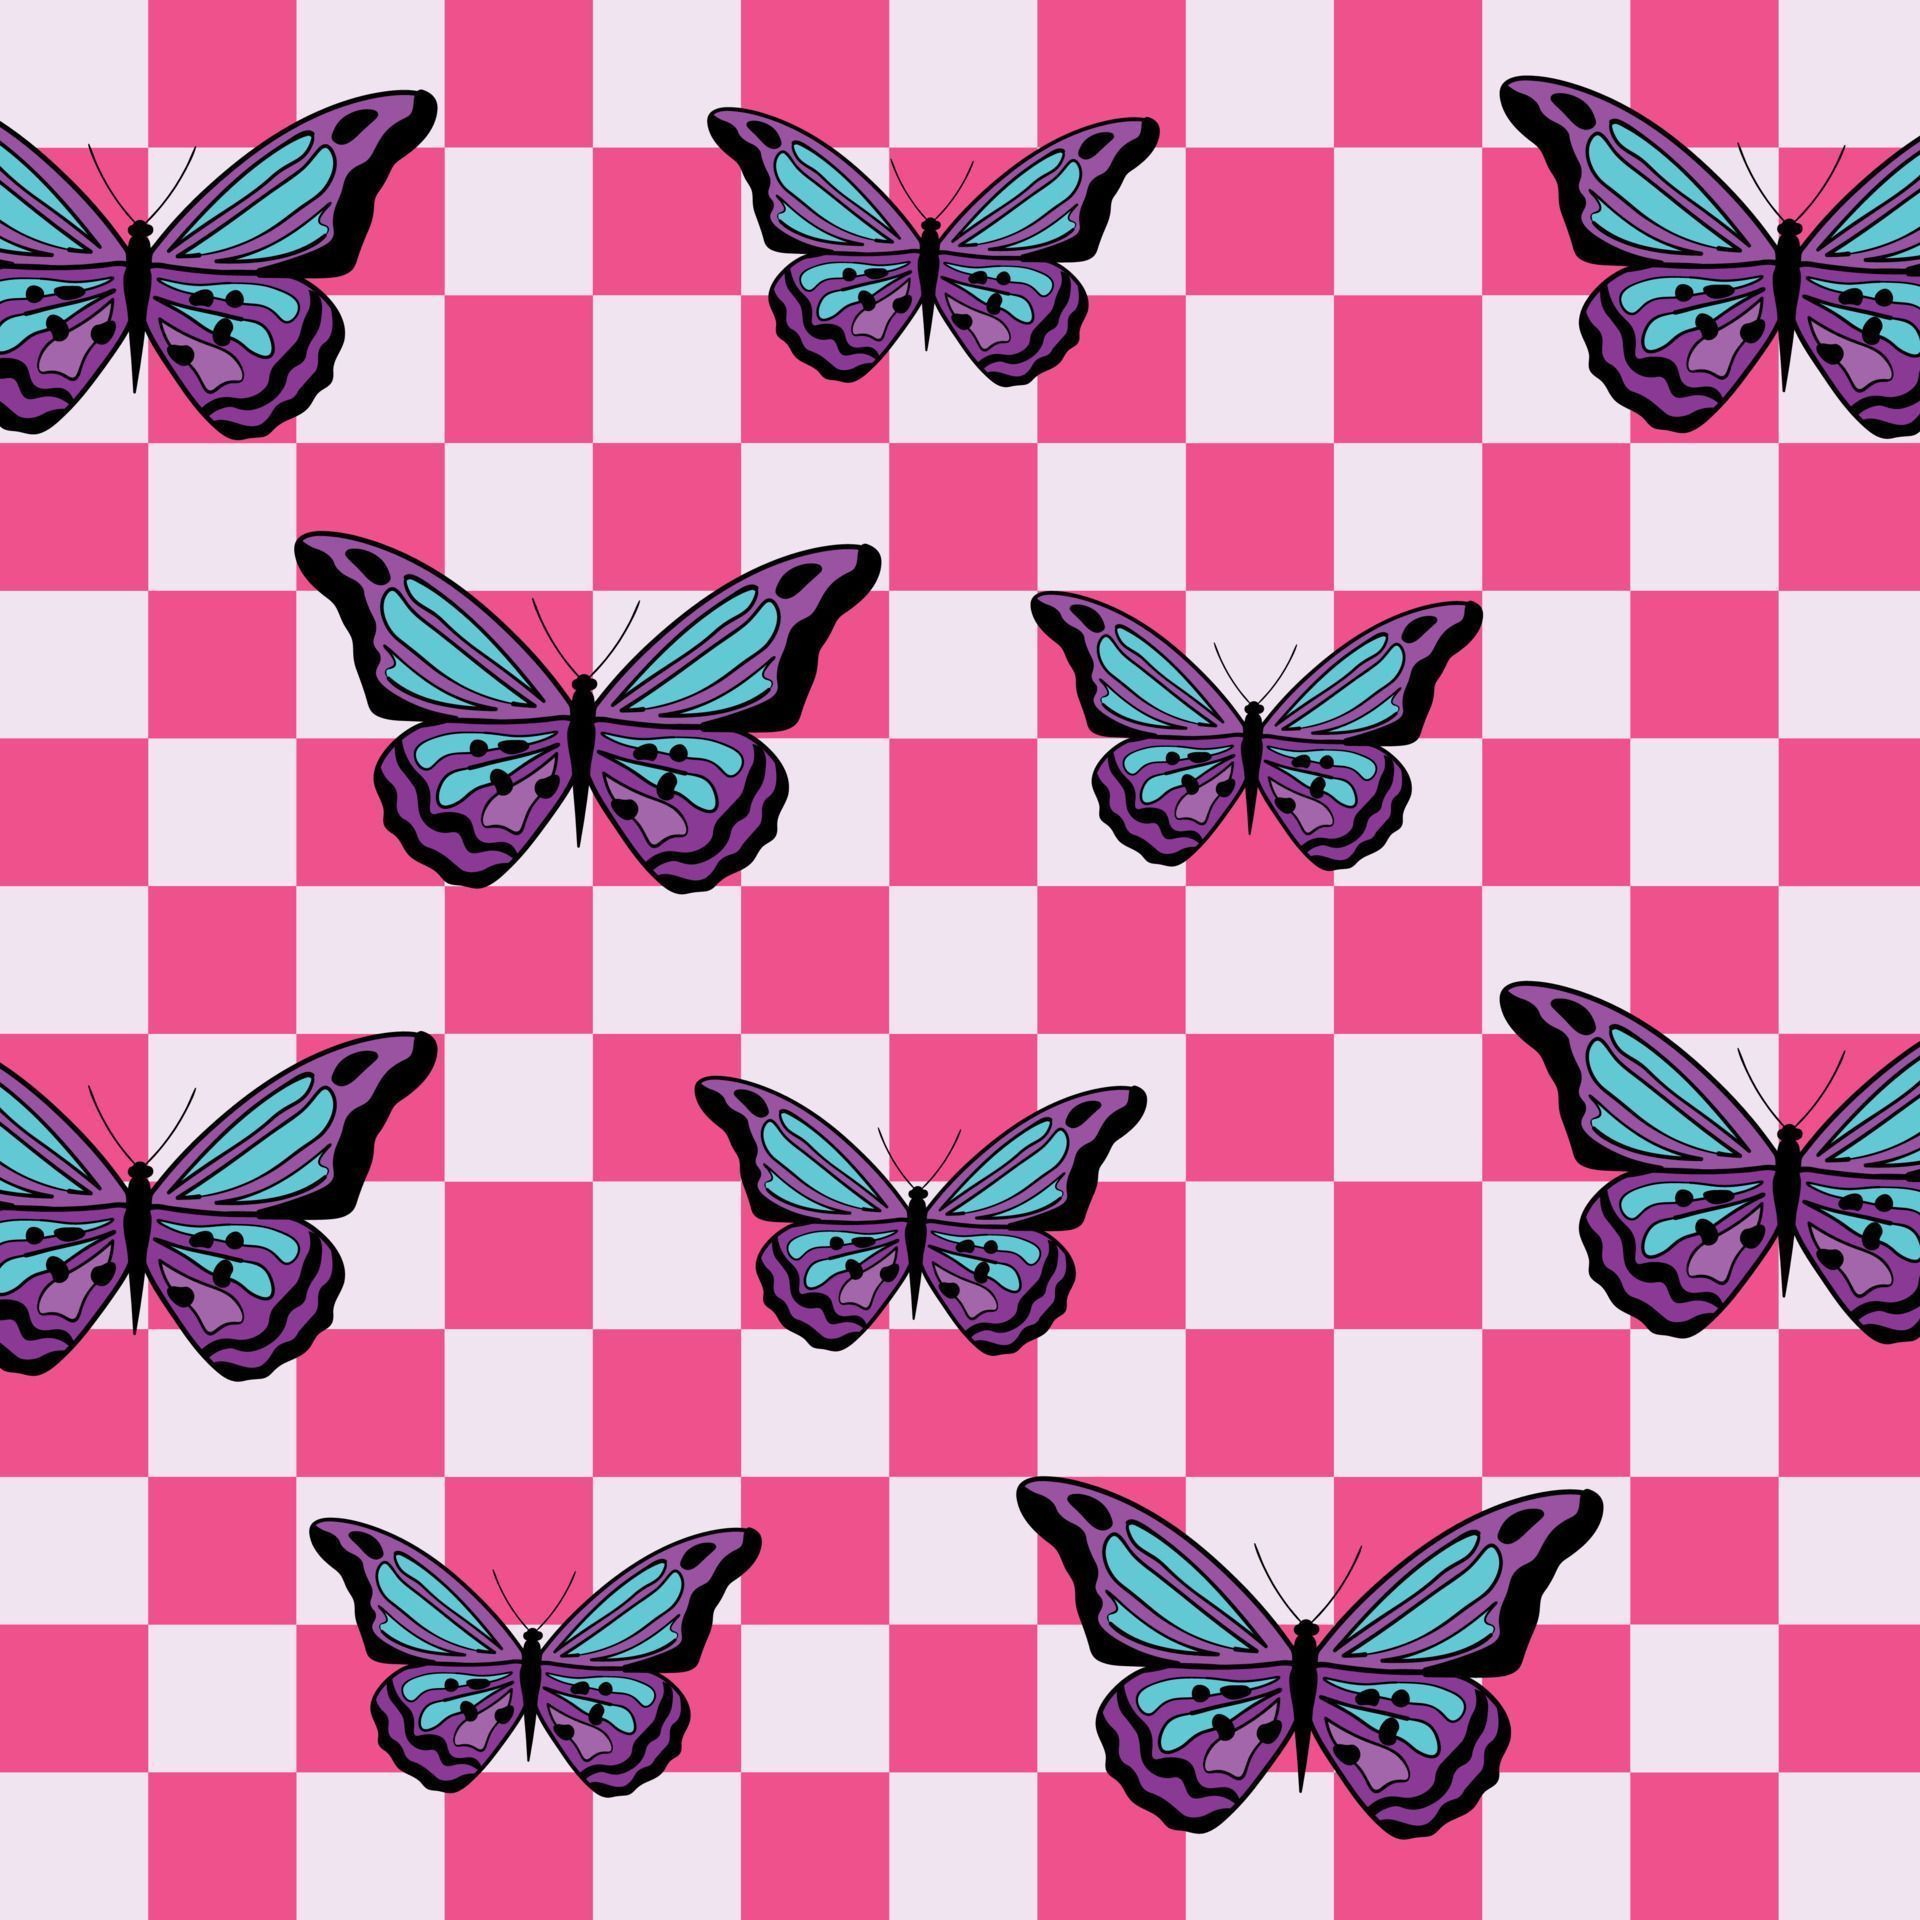 A repeating pattern of purple and blue butterflies on a pink and white checkered background - Emo, 2000s